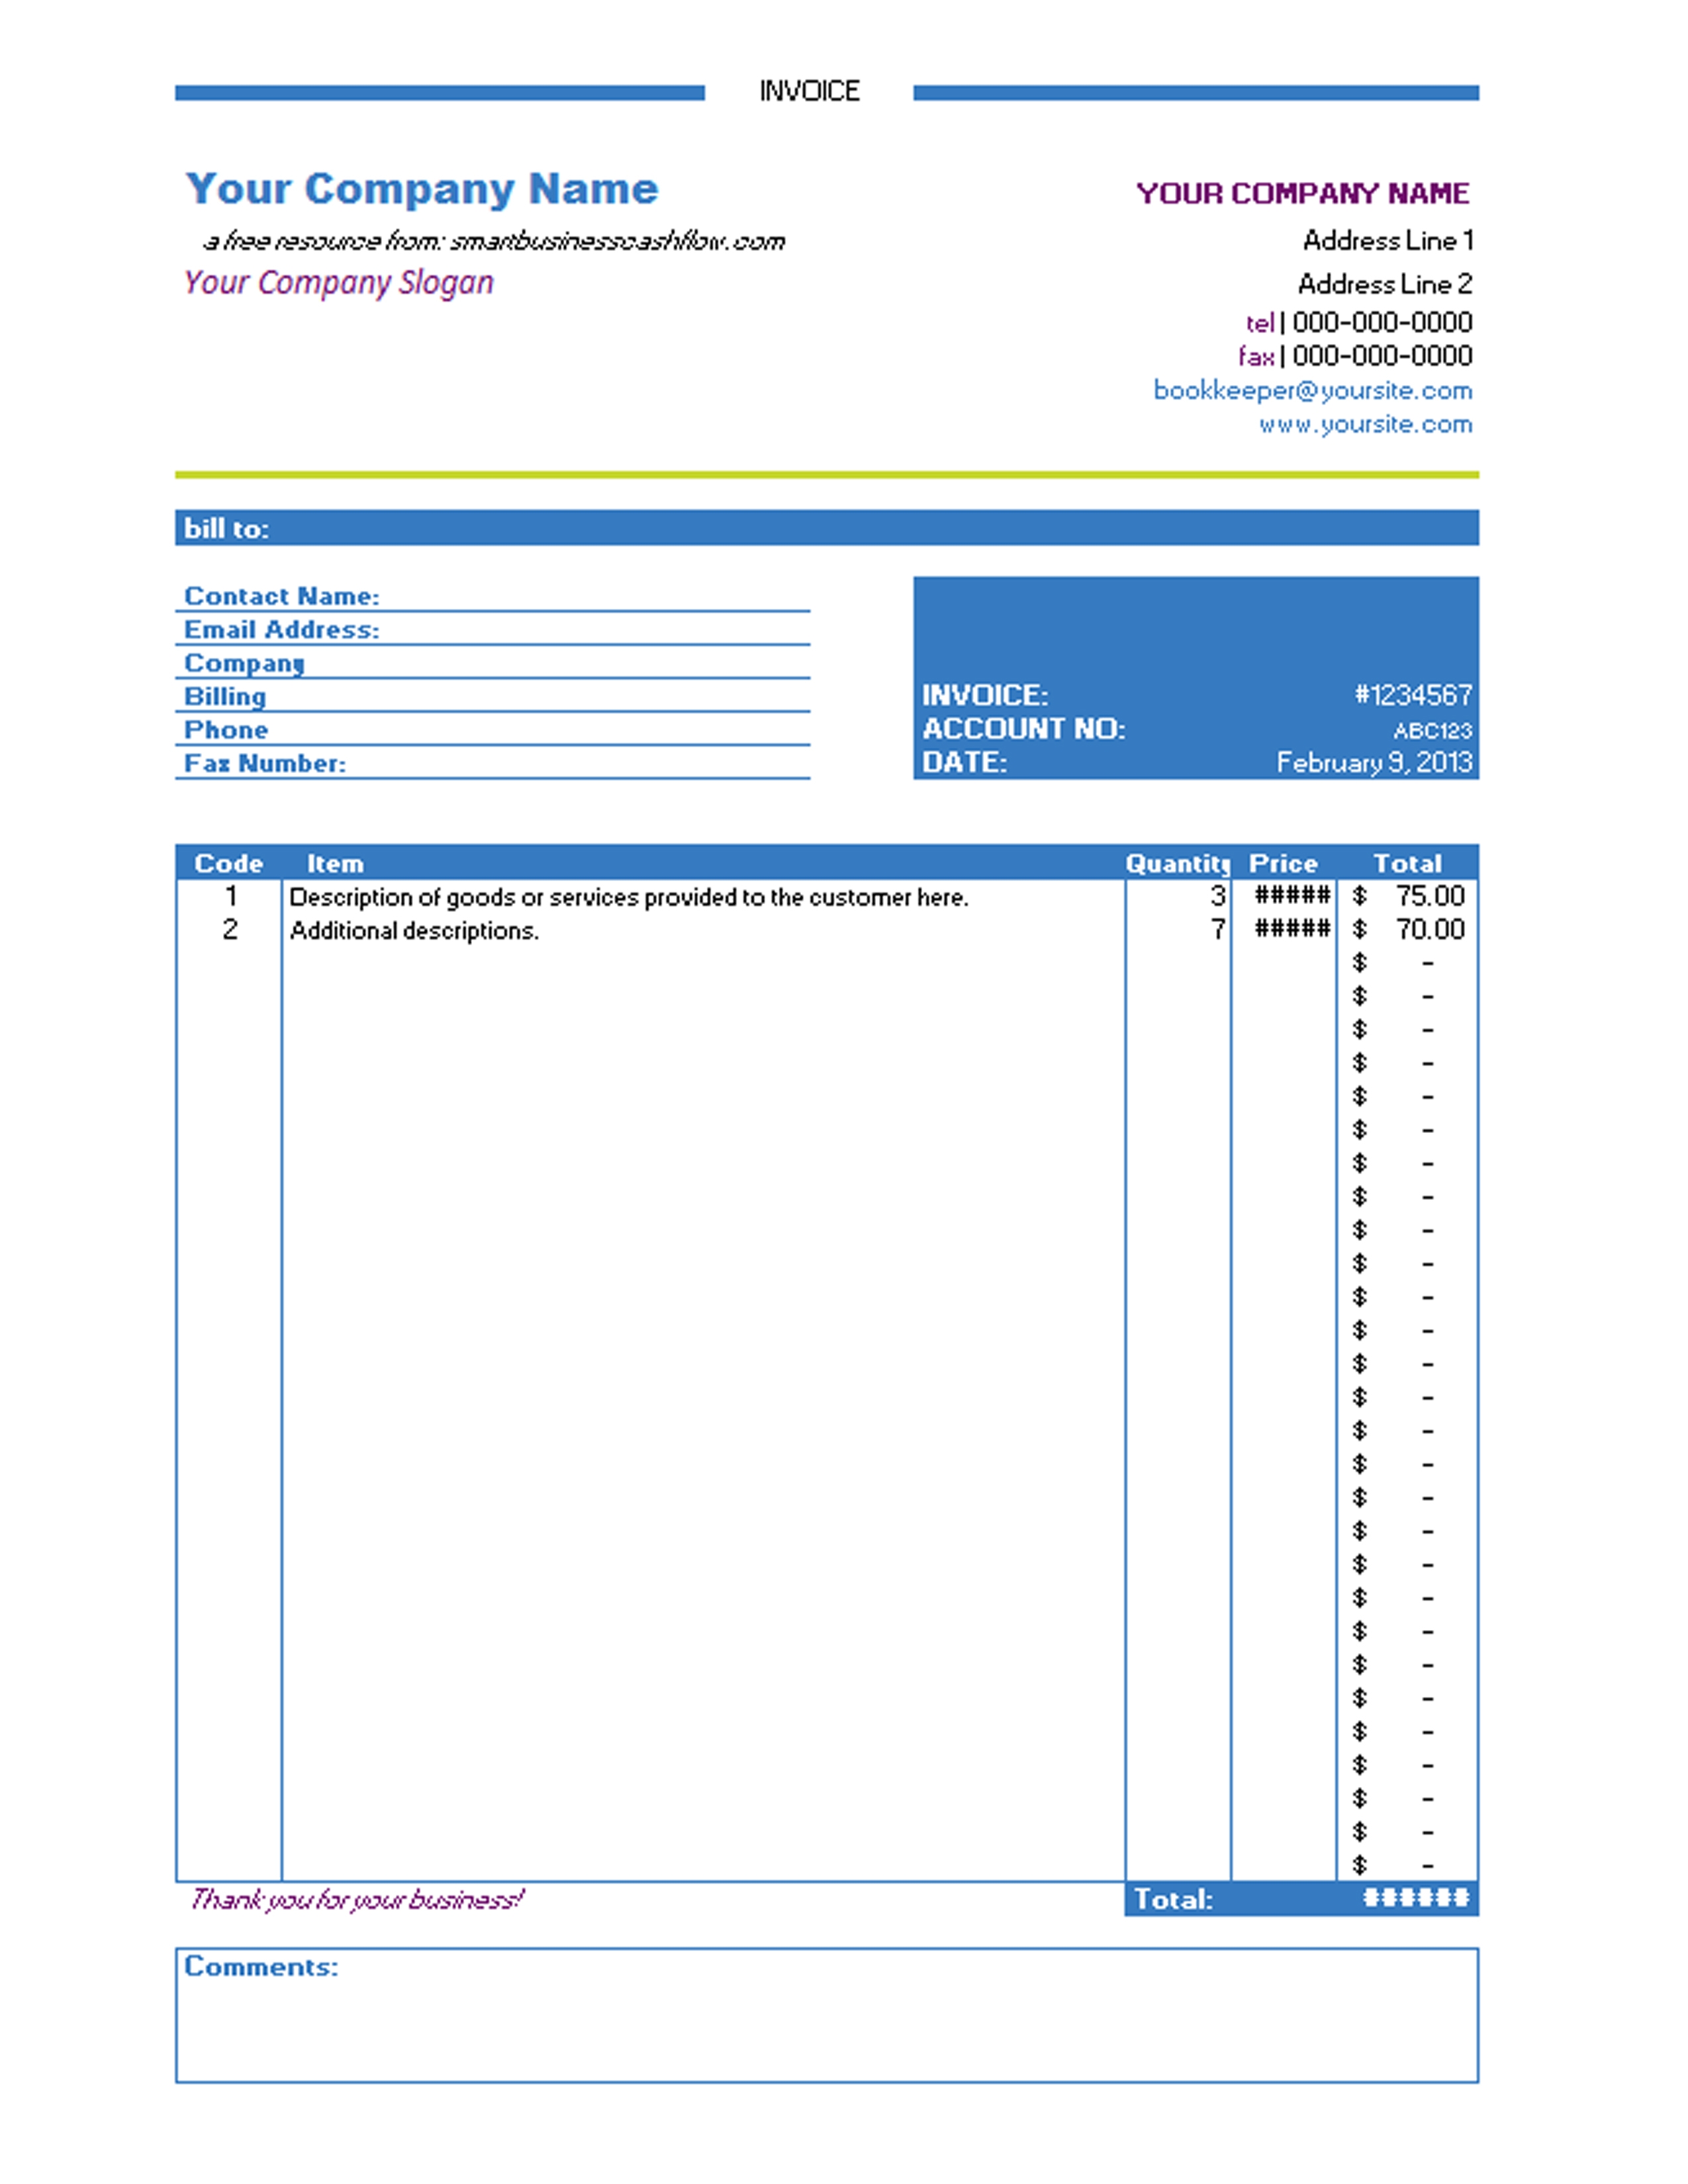 invoice template excel invoice sample template sales invoice invoice sample excel